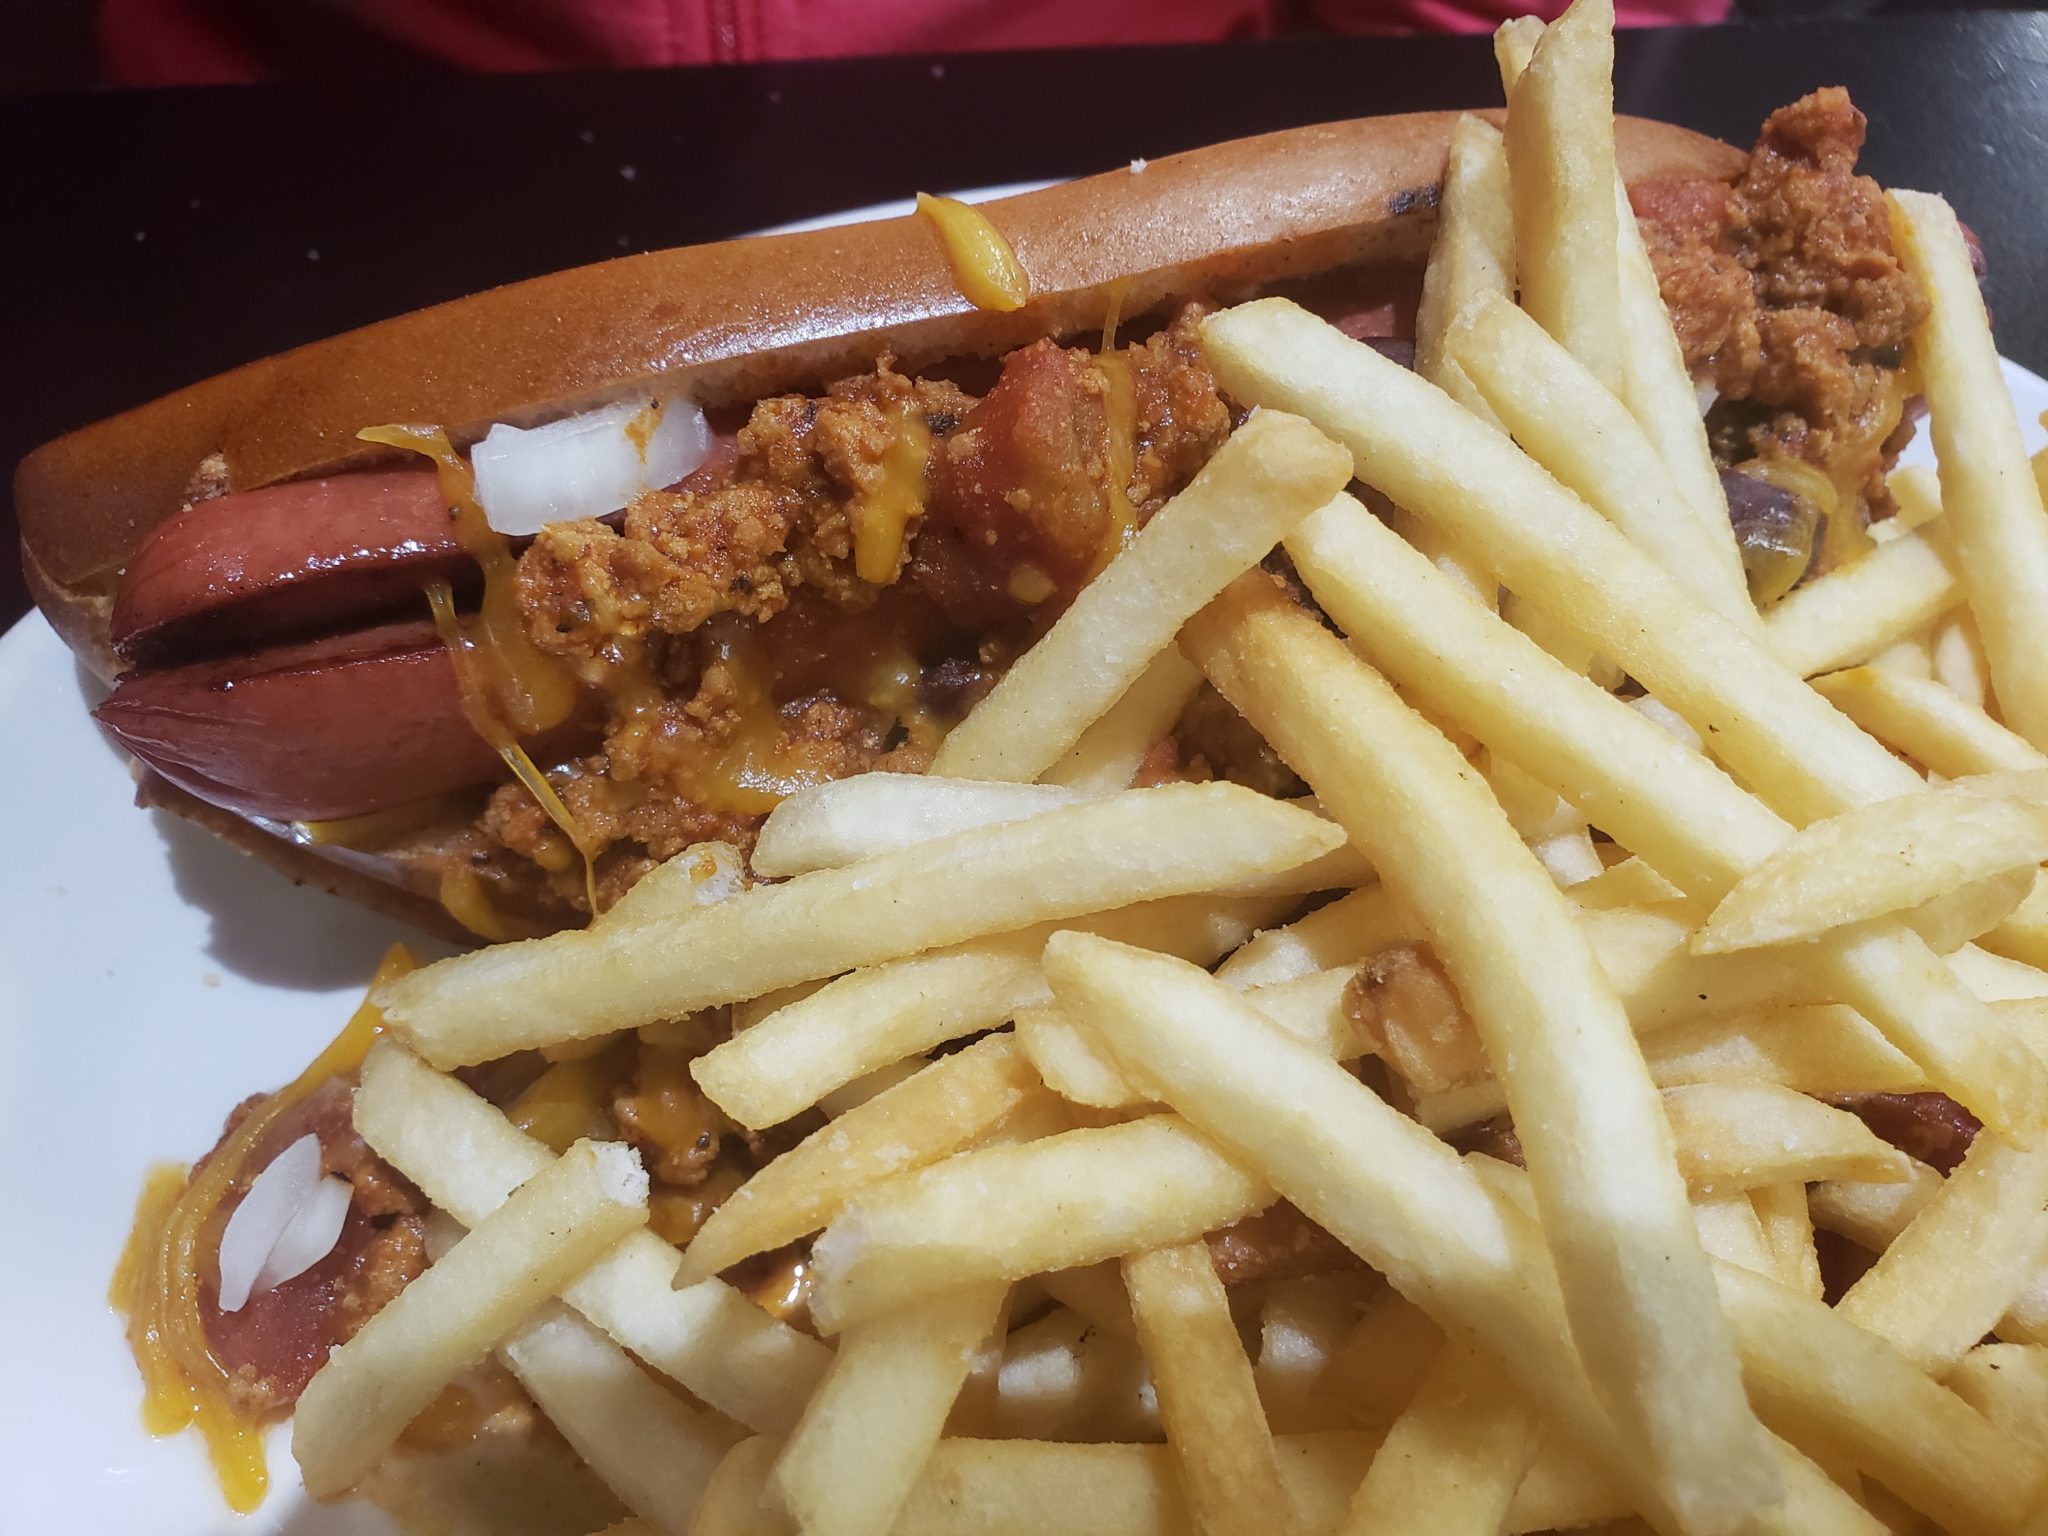 a hot dog and fries on a plate